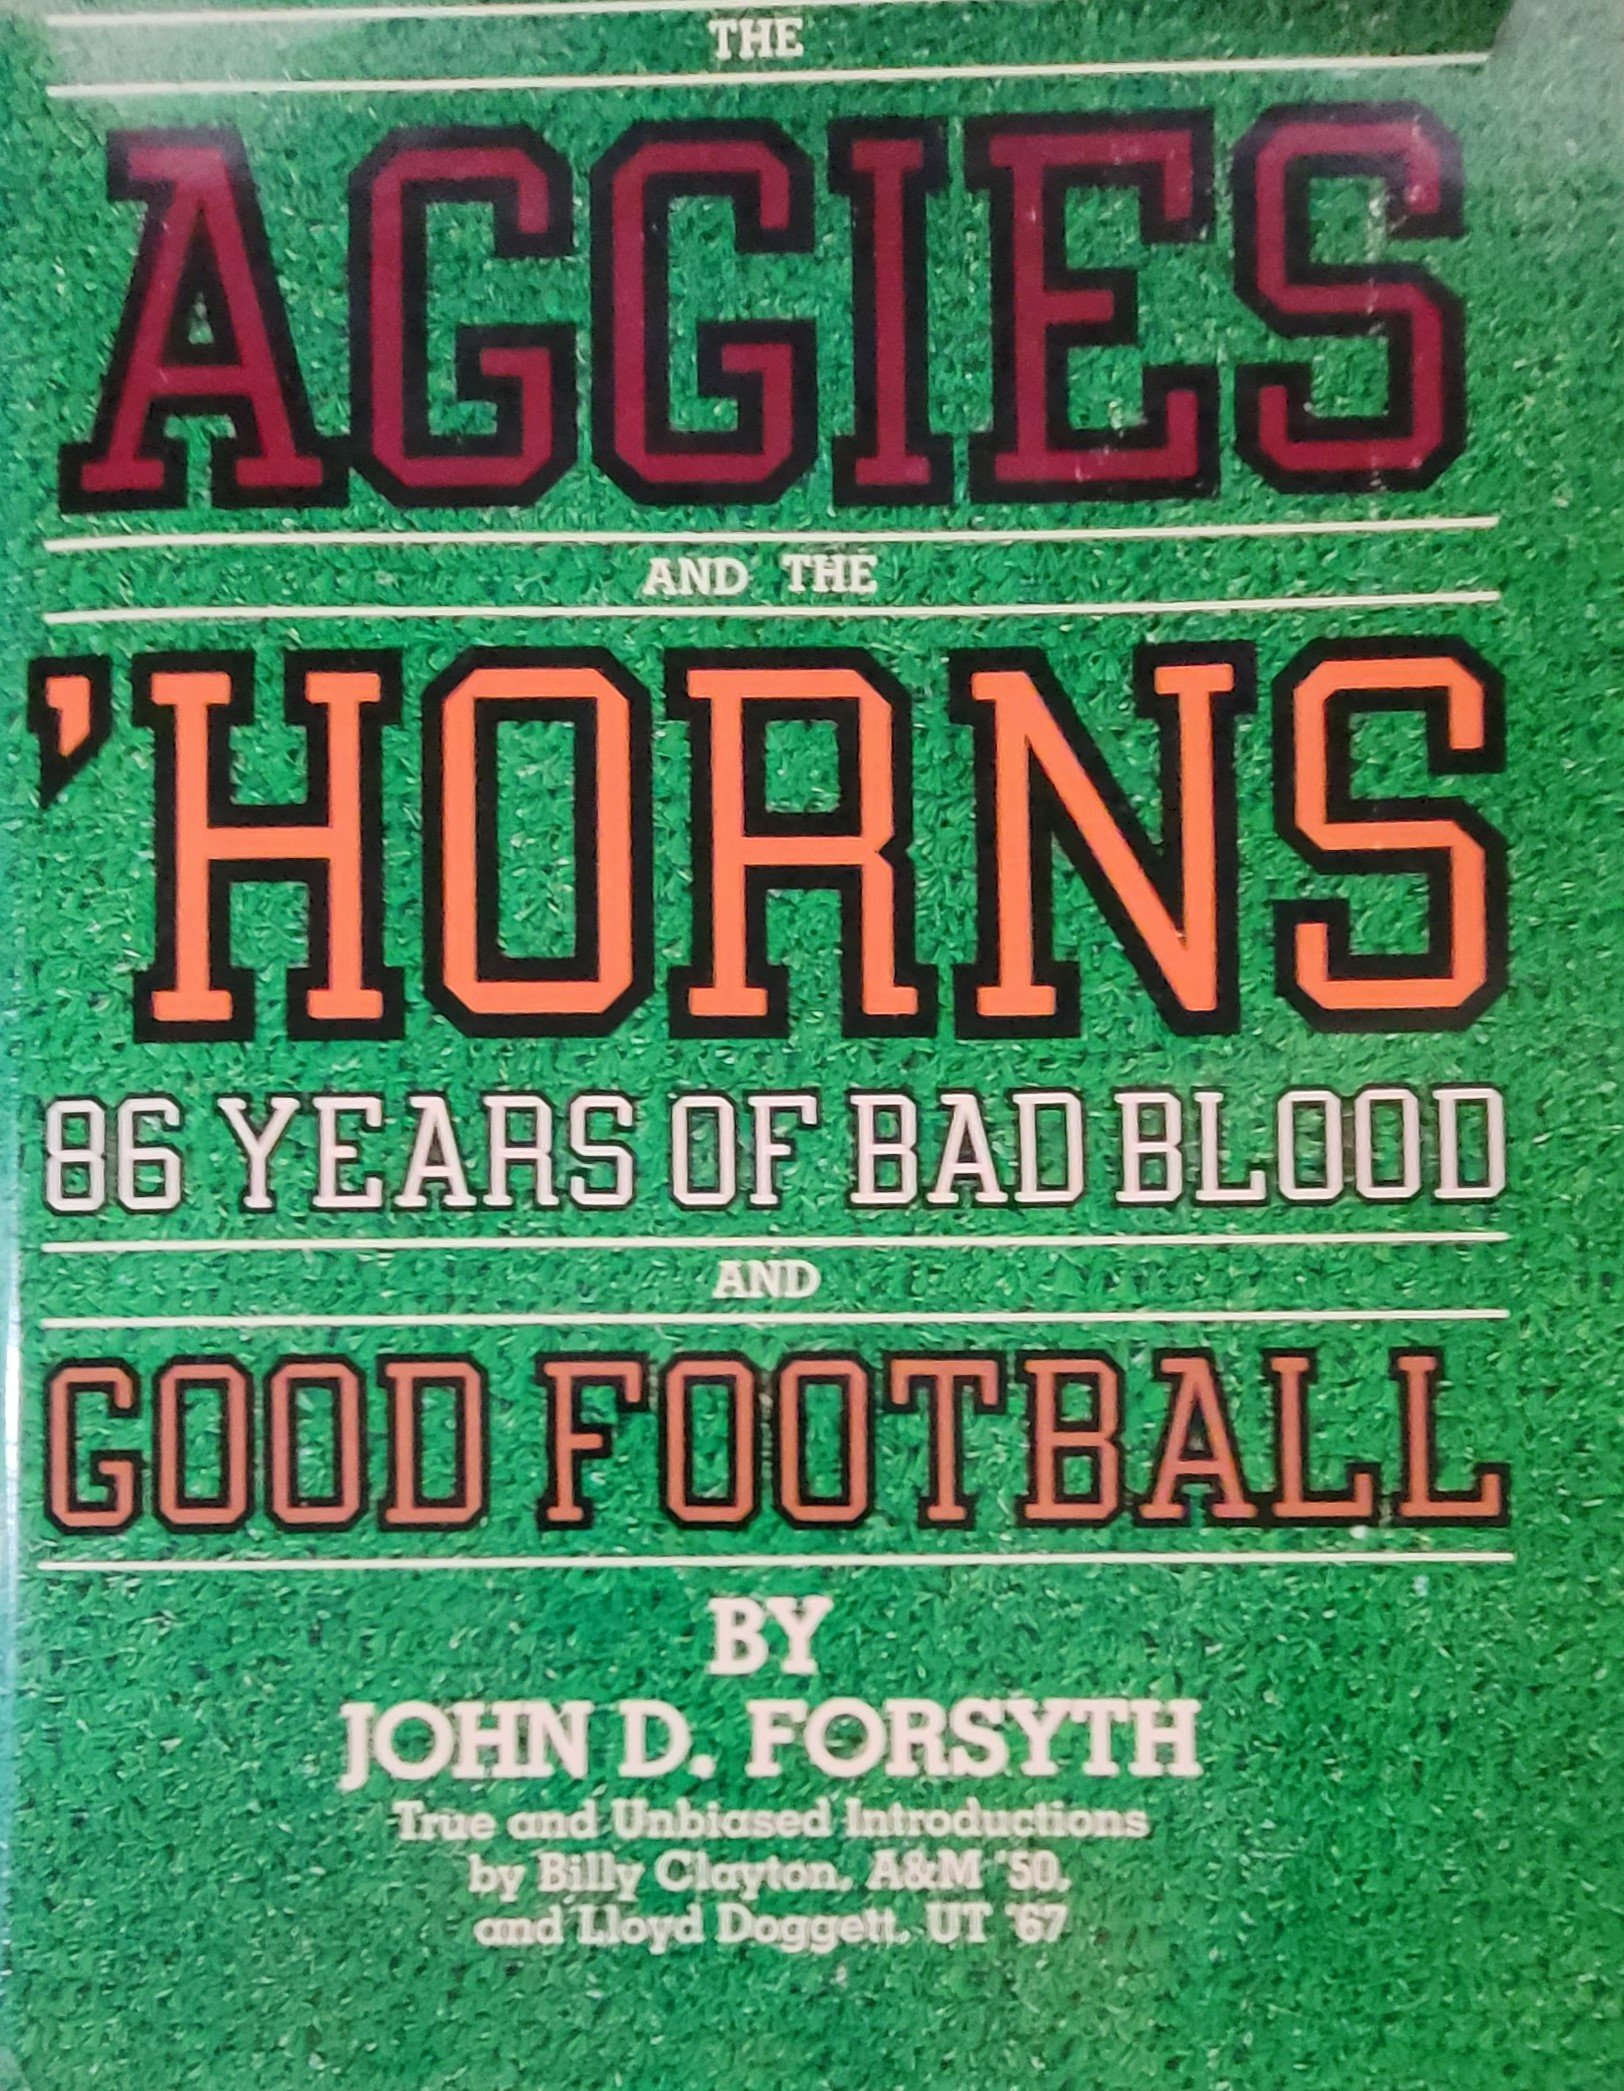 Aggies and Horns by Johne D. Forsyth